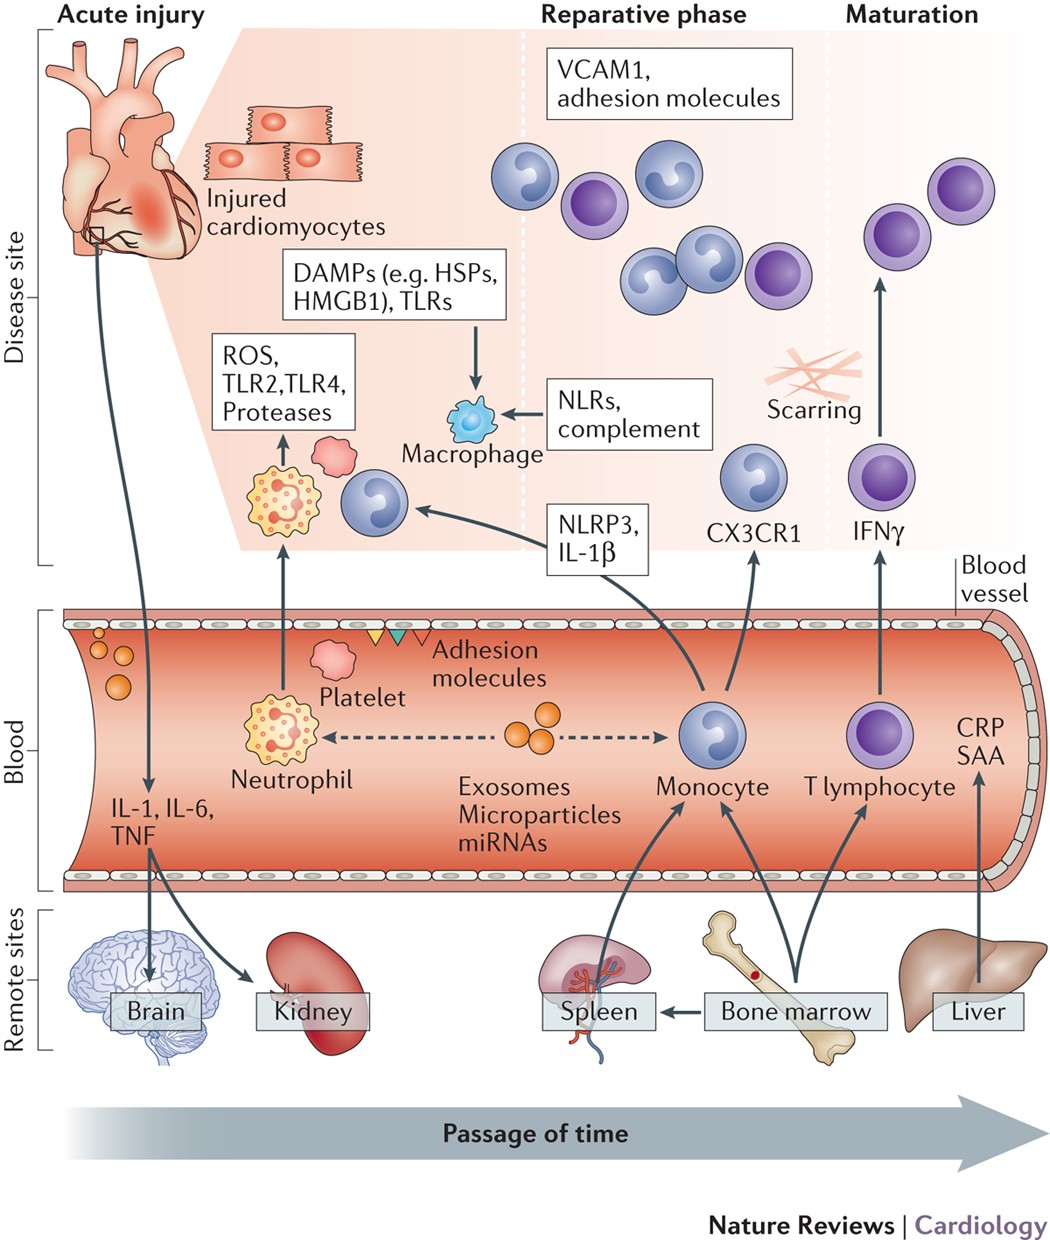 Nature Reviews Cardiology - Inflammatory processes are central to the devel...